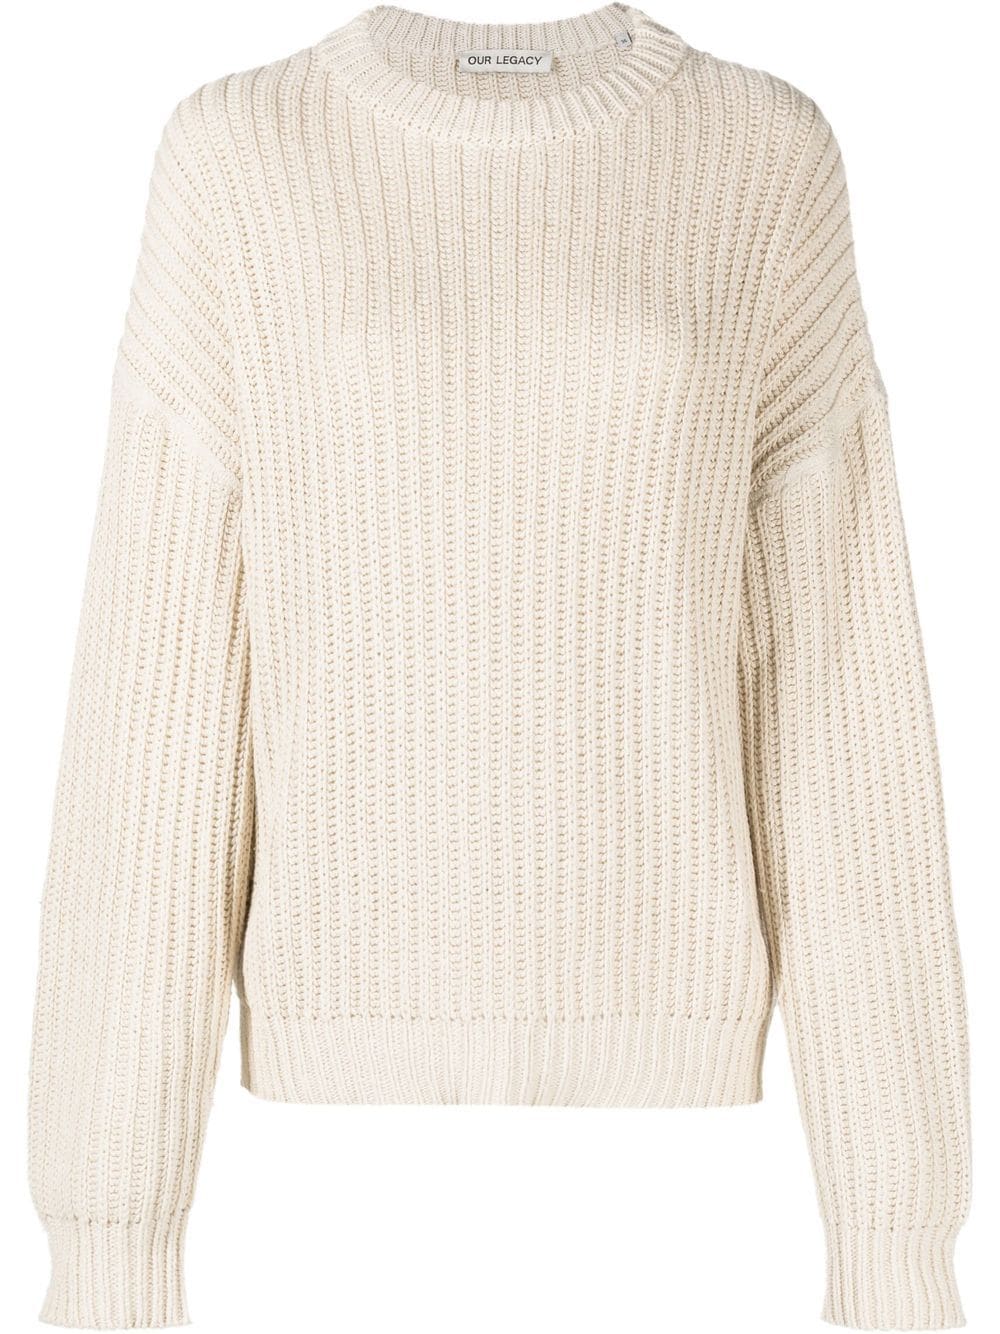 Image 1 of OUR LEGACY Sonar intarsia-knit jumper